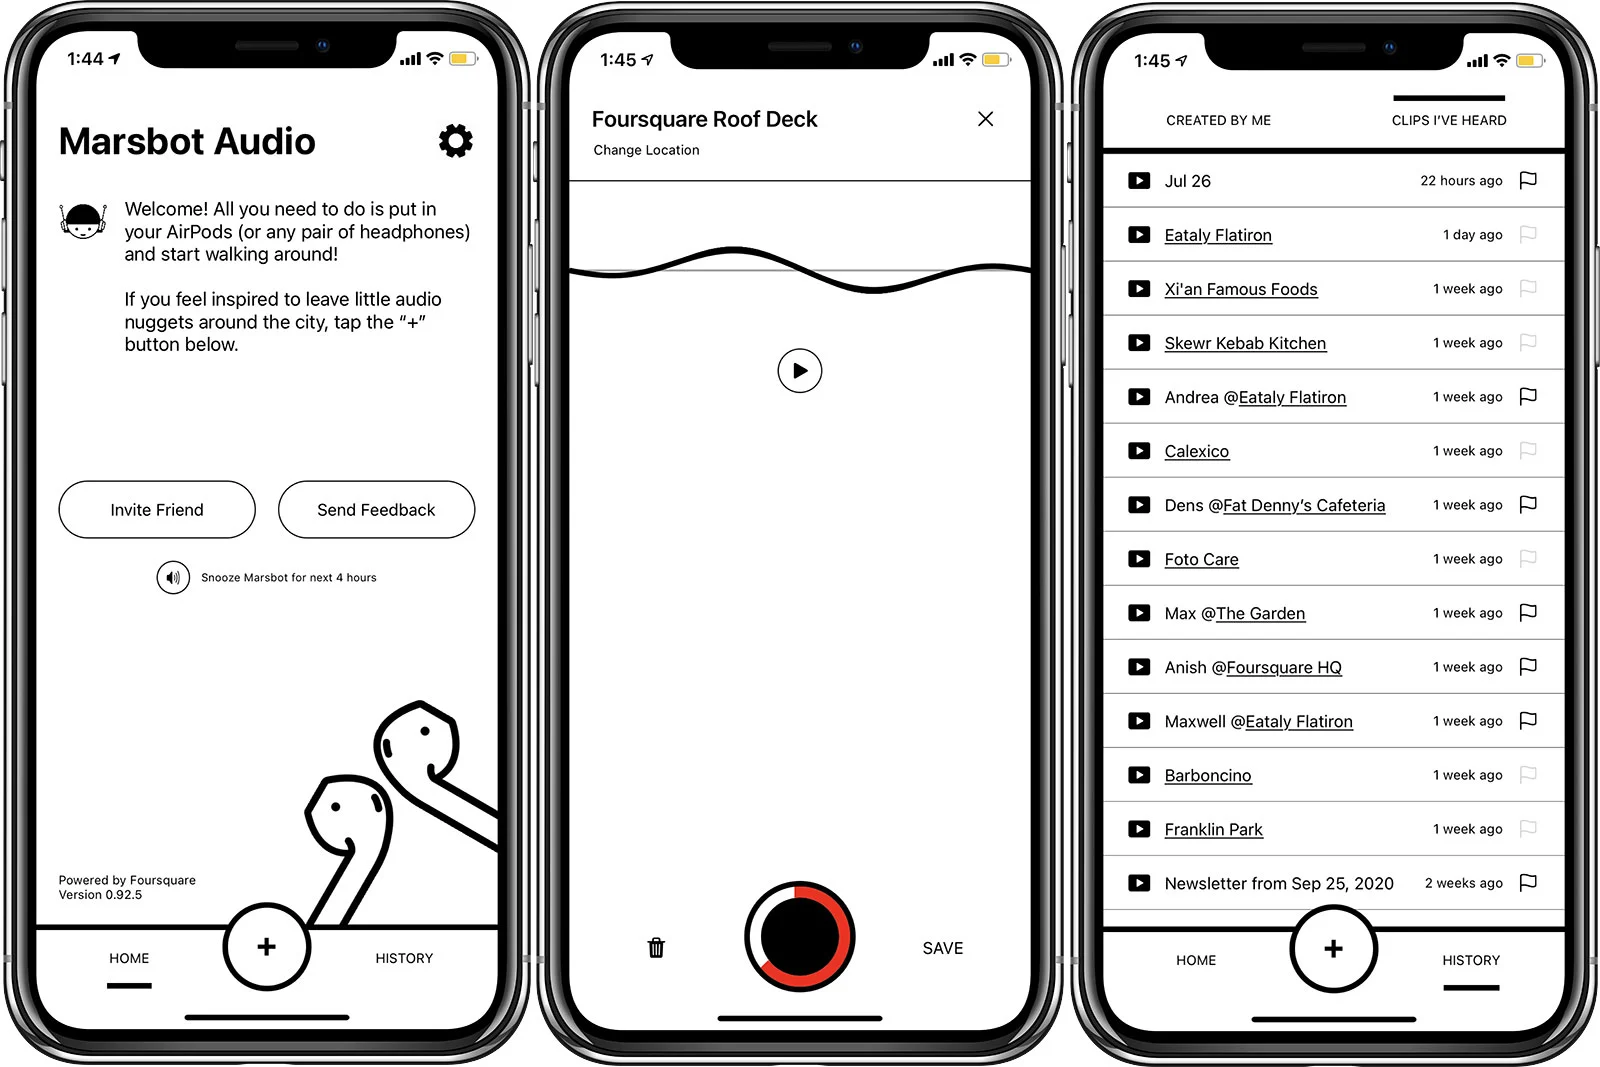 Foursquare's Marsbot for AirPods on an iPhone